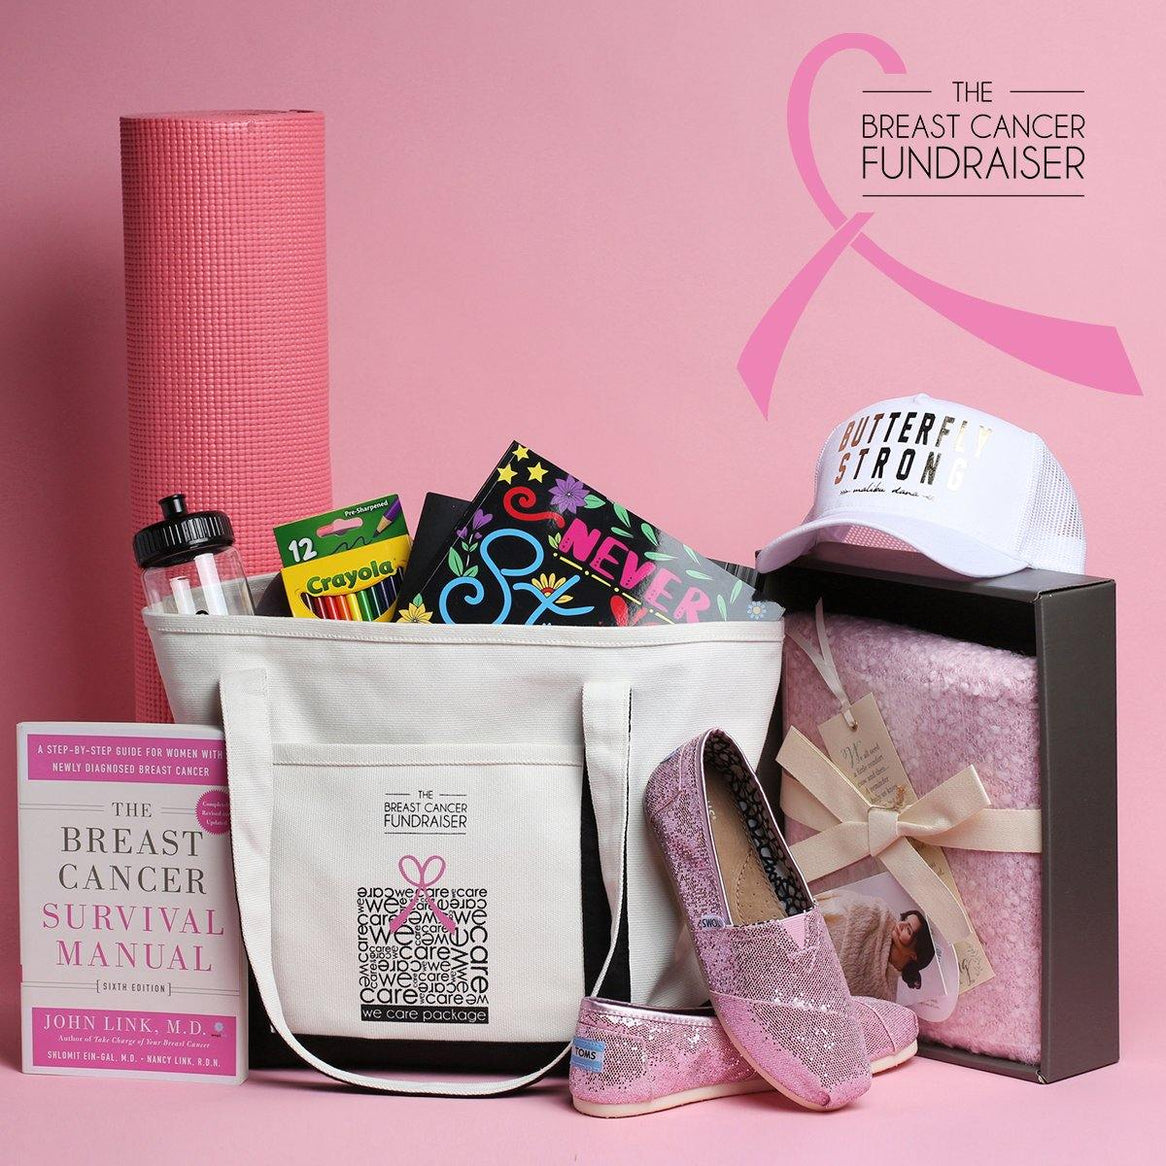 Donate $5 to THE Breast Cancer Fundraiser - MDF Instruments Official Store - DIGITAL